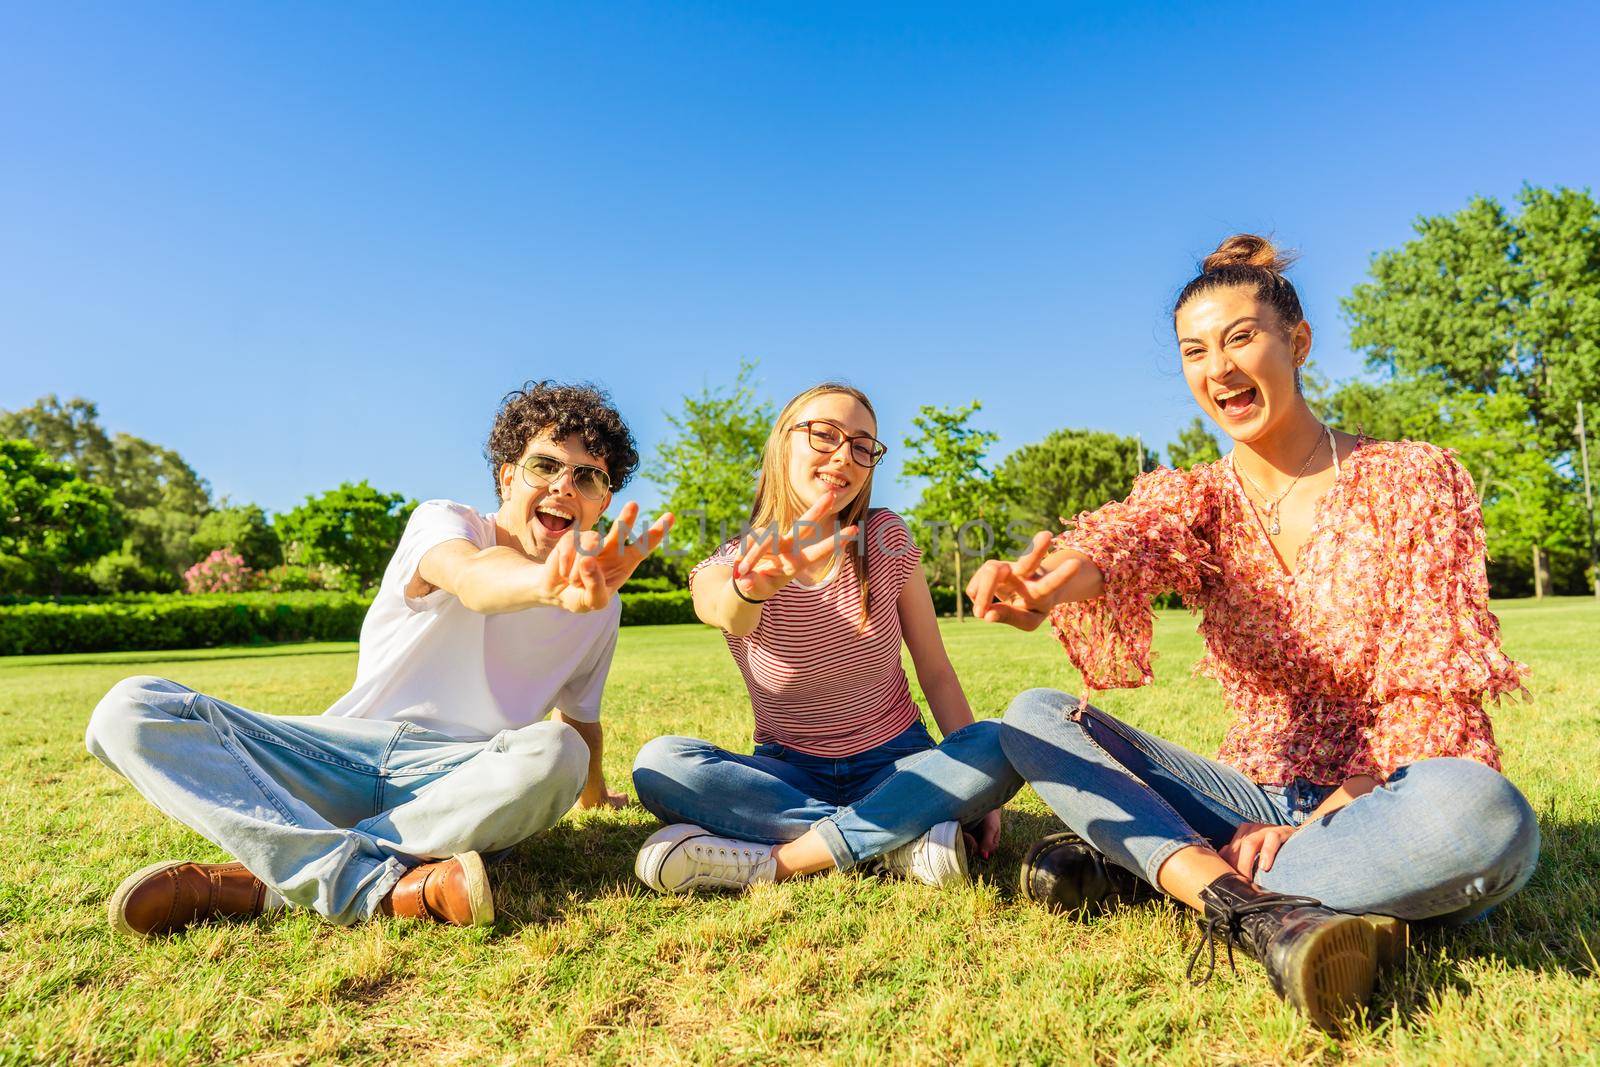 Three young student best friends sitting on grass in city park showing victory sign with two fingers looking at camera. Concept of unity and solidarity in youth age. Happy gen z smiling in nature by robbyfontanesi